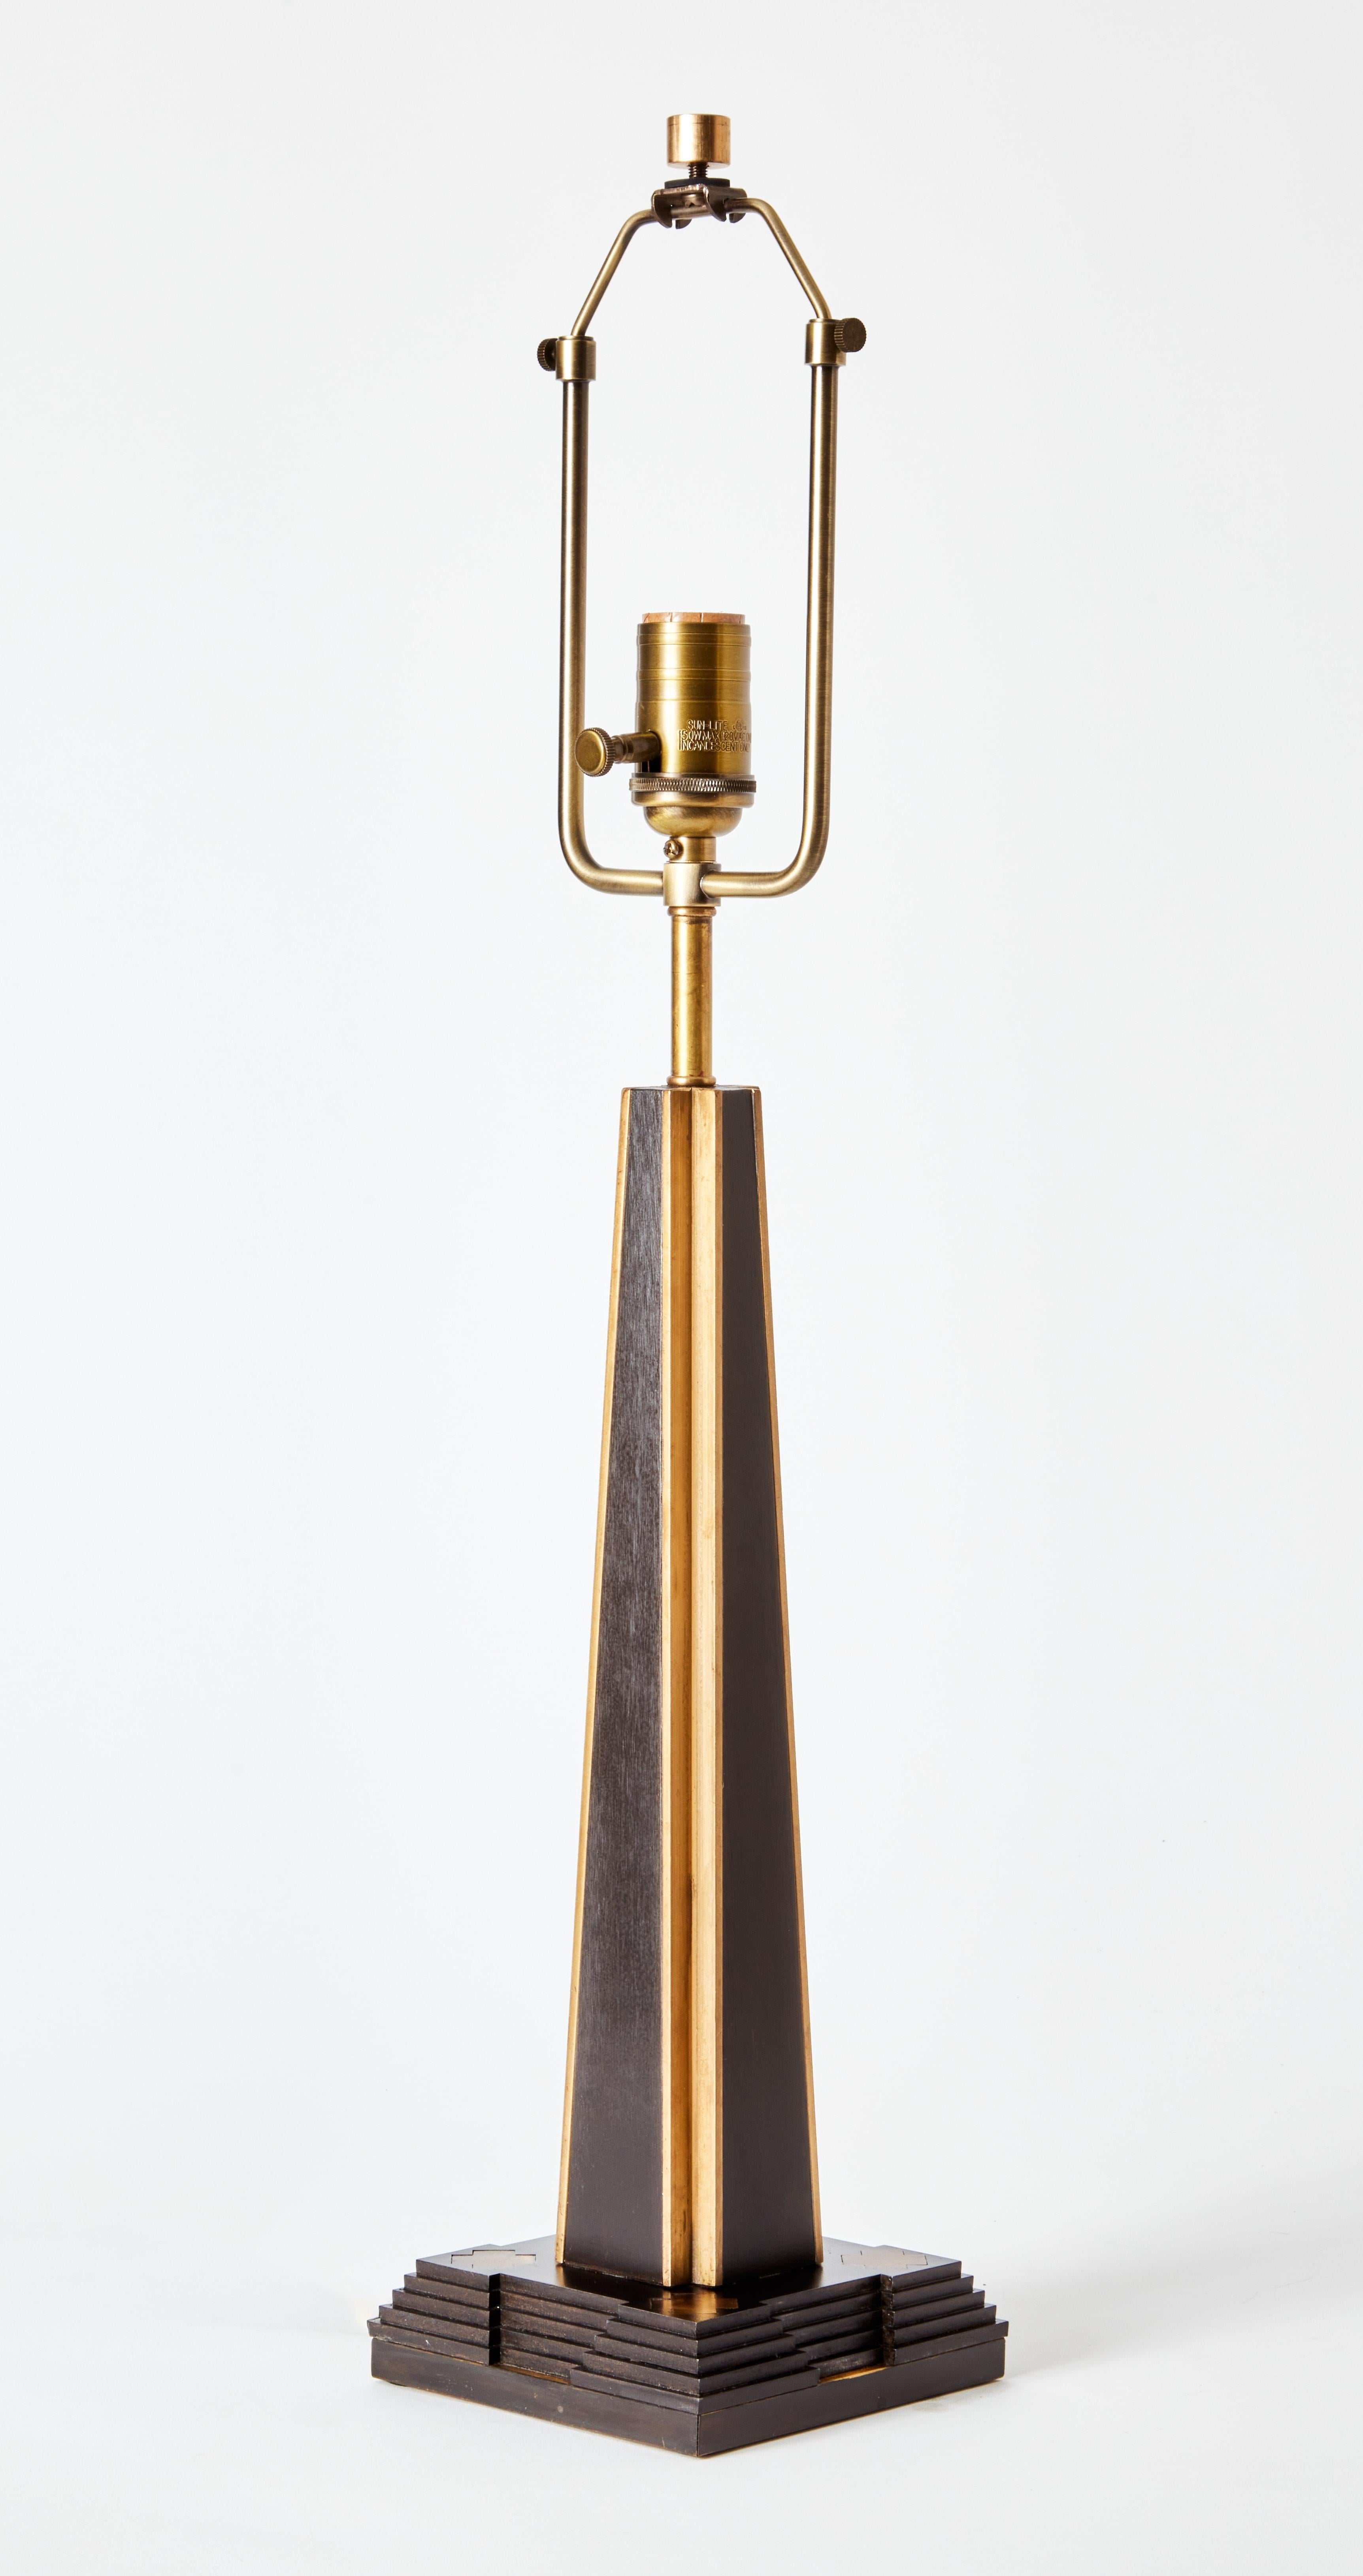 A table lamp in pyramid form – set on a fluctuating, stepped base. The design references the architecture of mesoamerica as well as inspirations from the neo-andean and art deco movements.

The brass detailing has been lightly antiqued while the